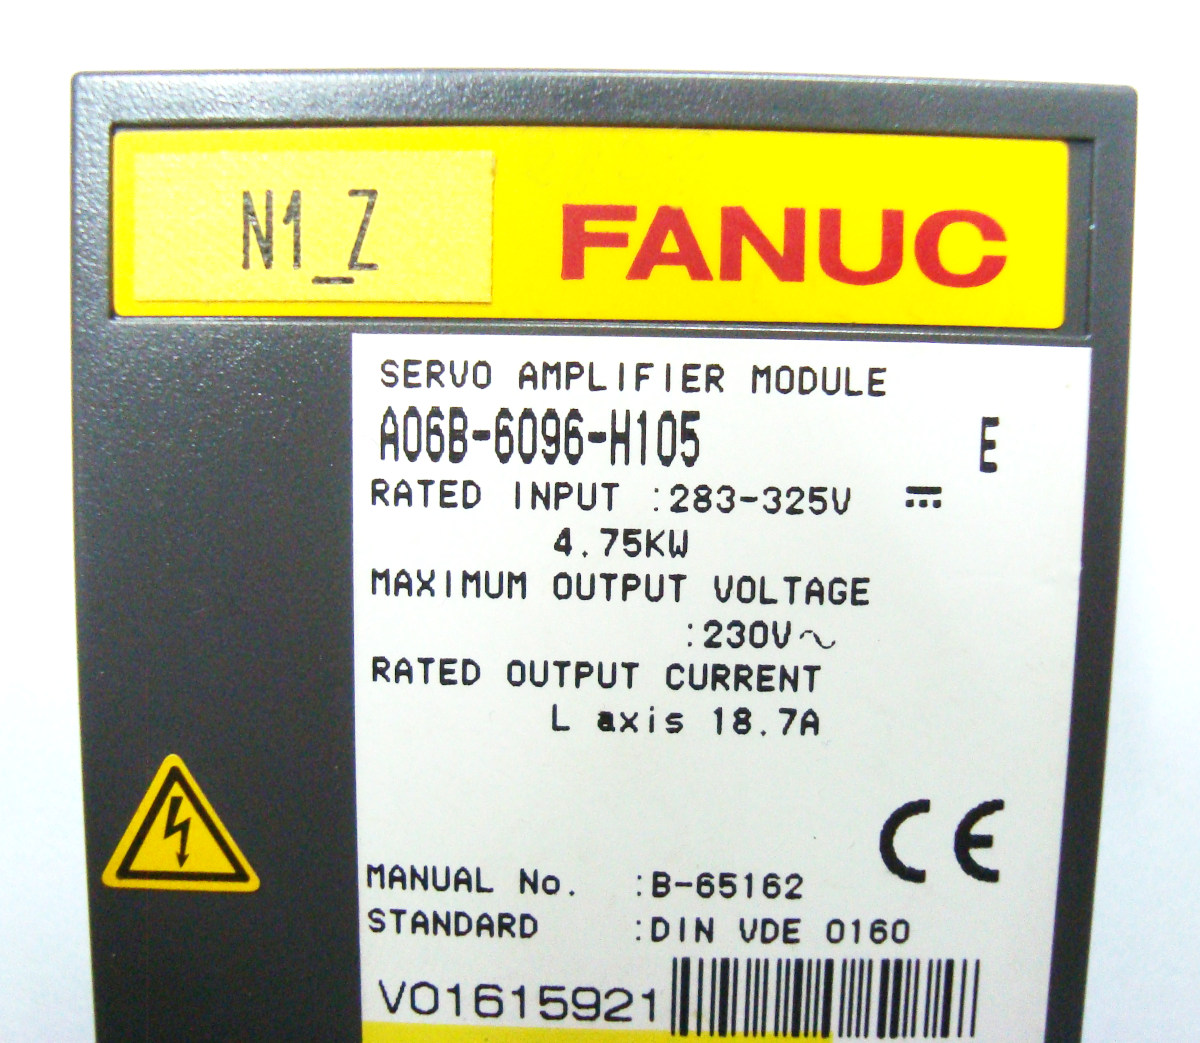 4 Exchange A06b-6096-h105 Fanuc With Warranty